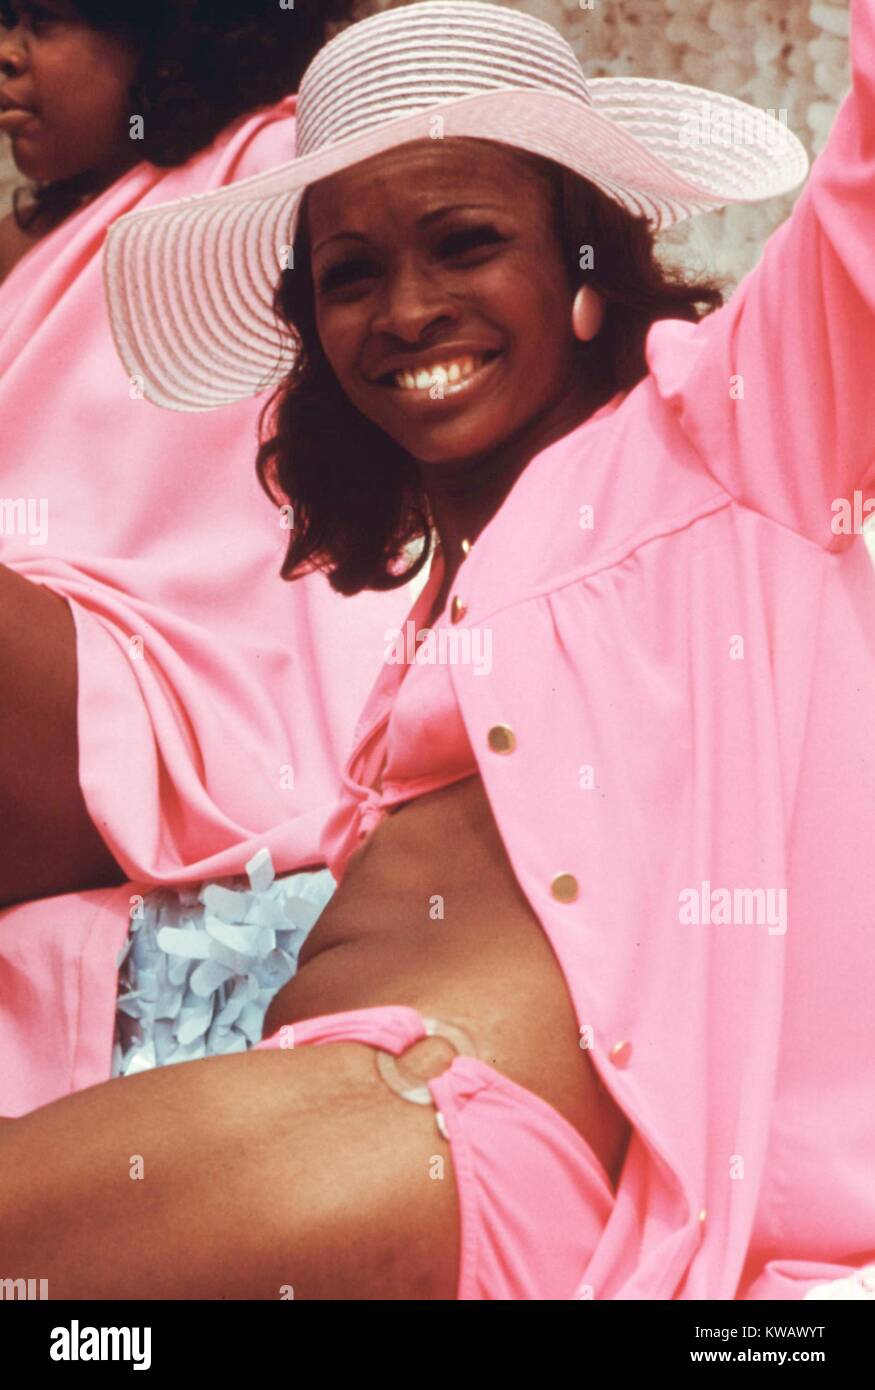 A woman in a pink outfit and sunhat waves from a float during the annual Bud Billiken Day parade in Chicago, Illinois, August, 1973. Image courtesy National Archives. Stock Photo